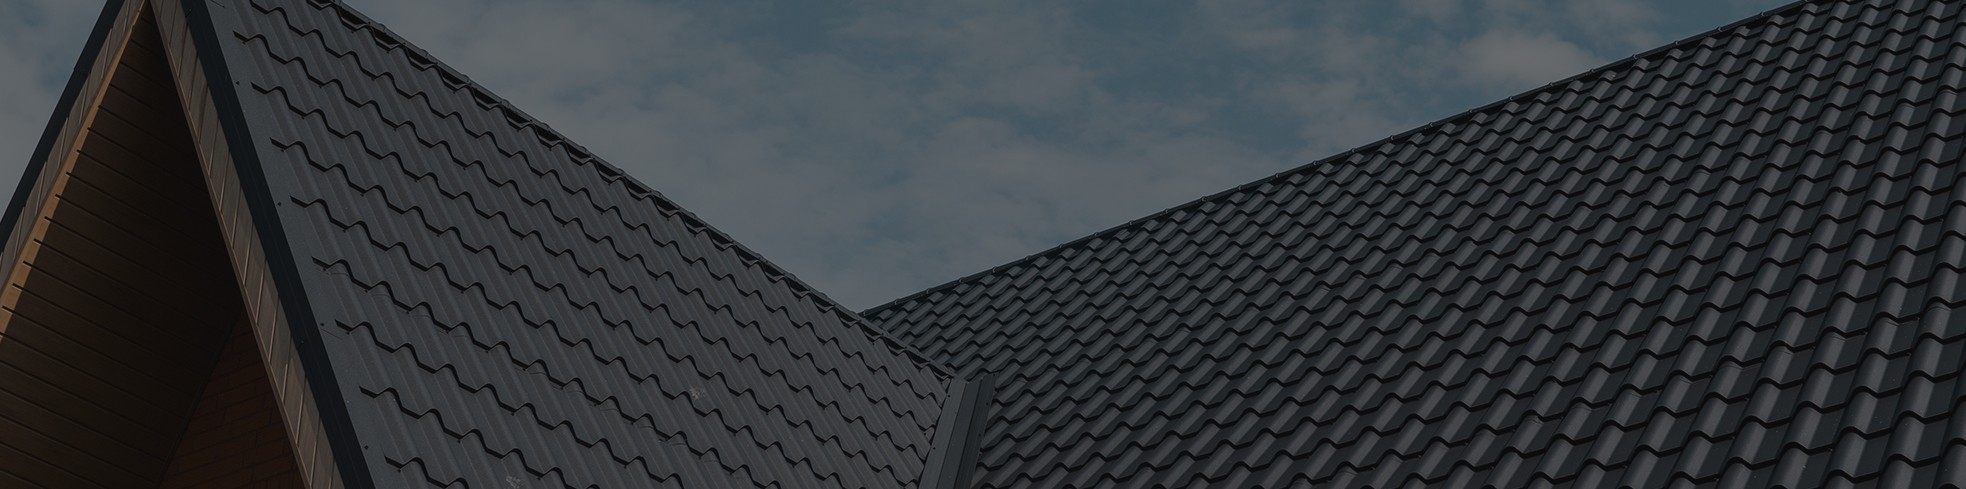 Built-up Roofing systems installation & repair in Milwaukee 